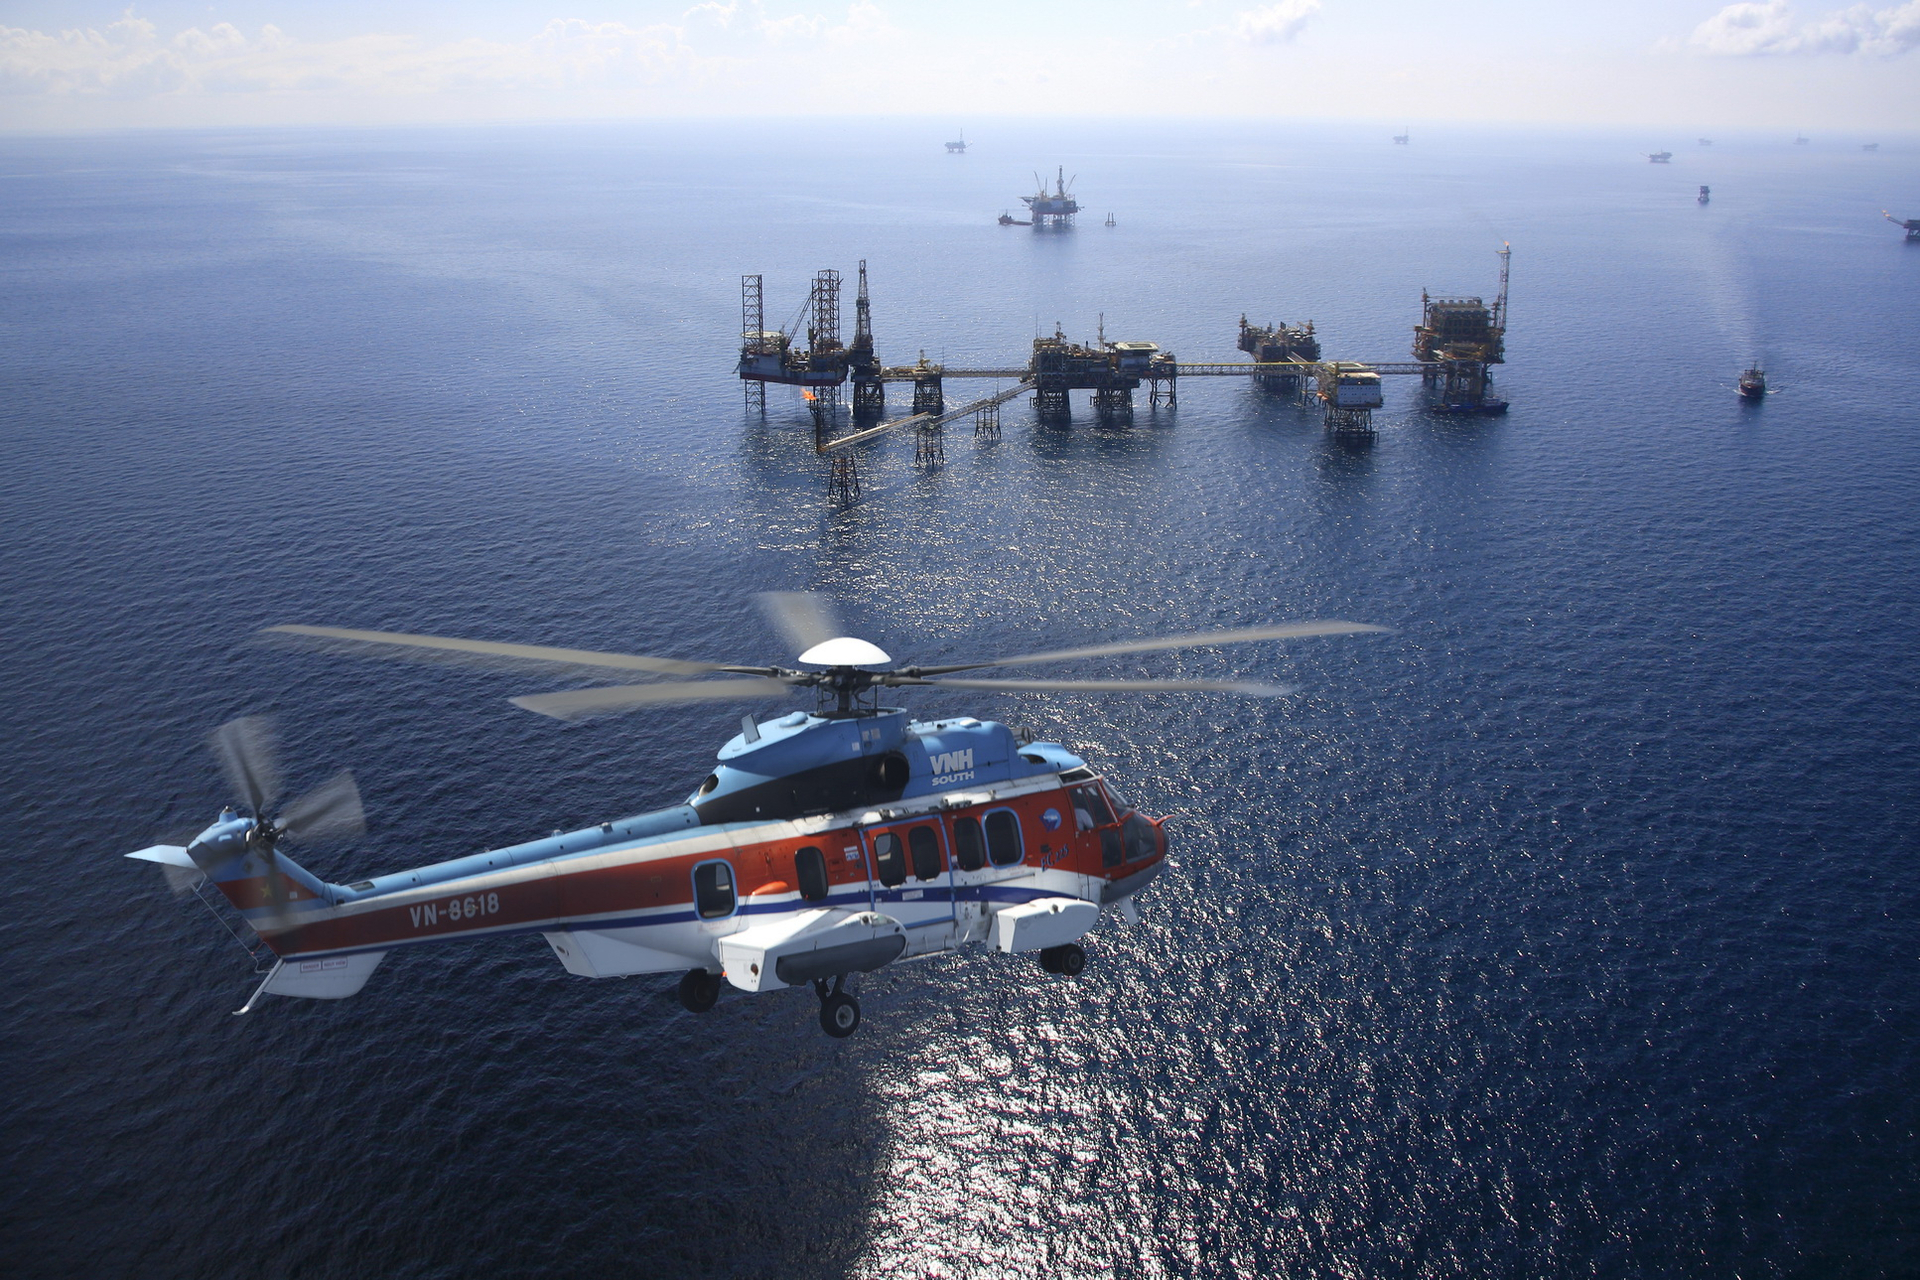 An oil rig offshore Vietnam. Photo courtesy of Vietnam Helicopter South.